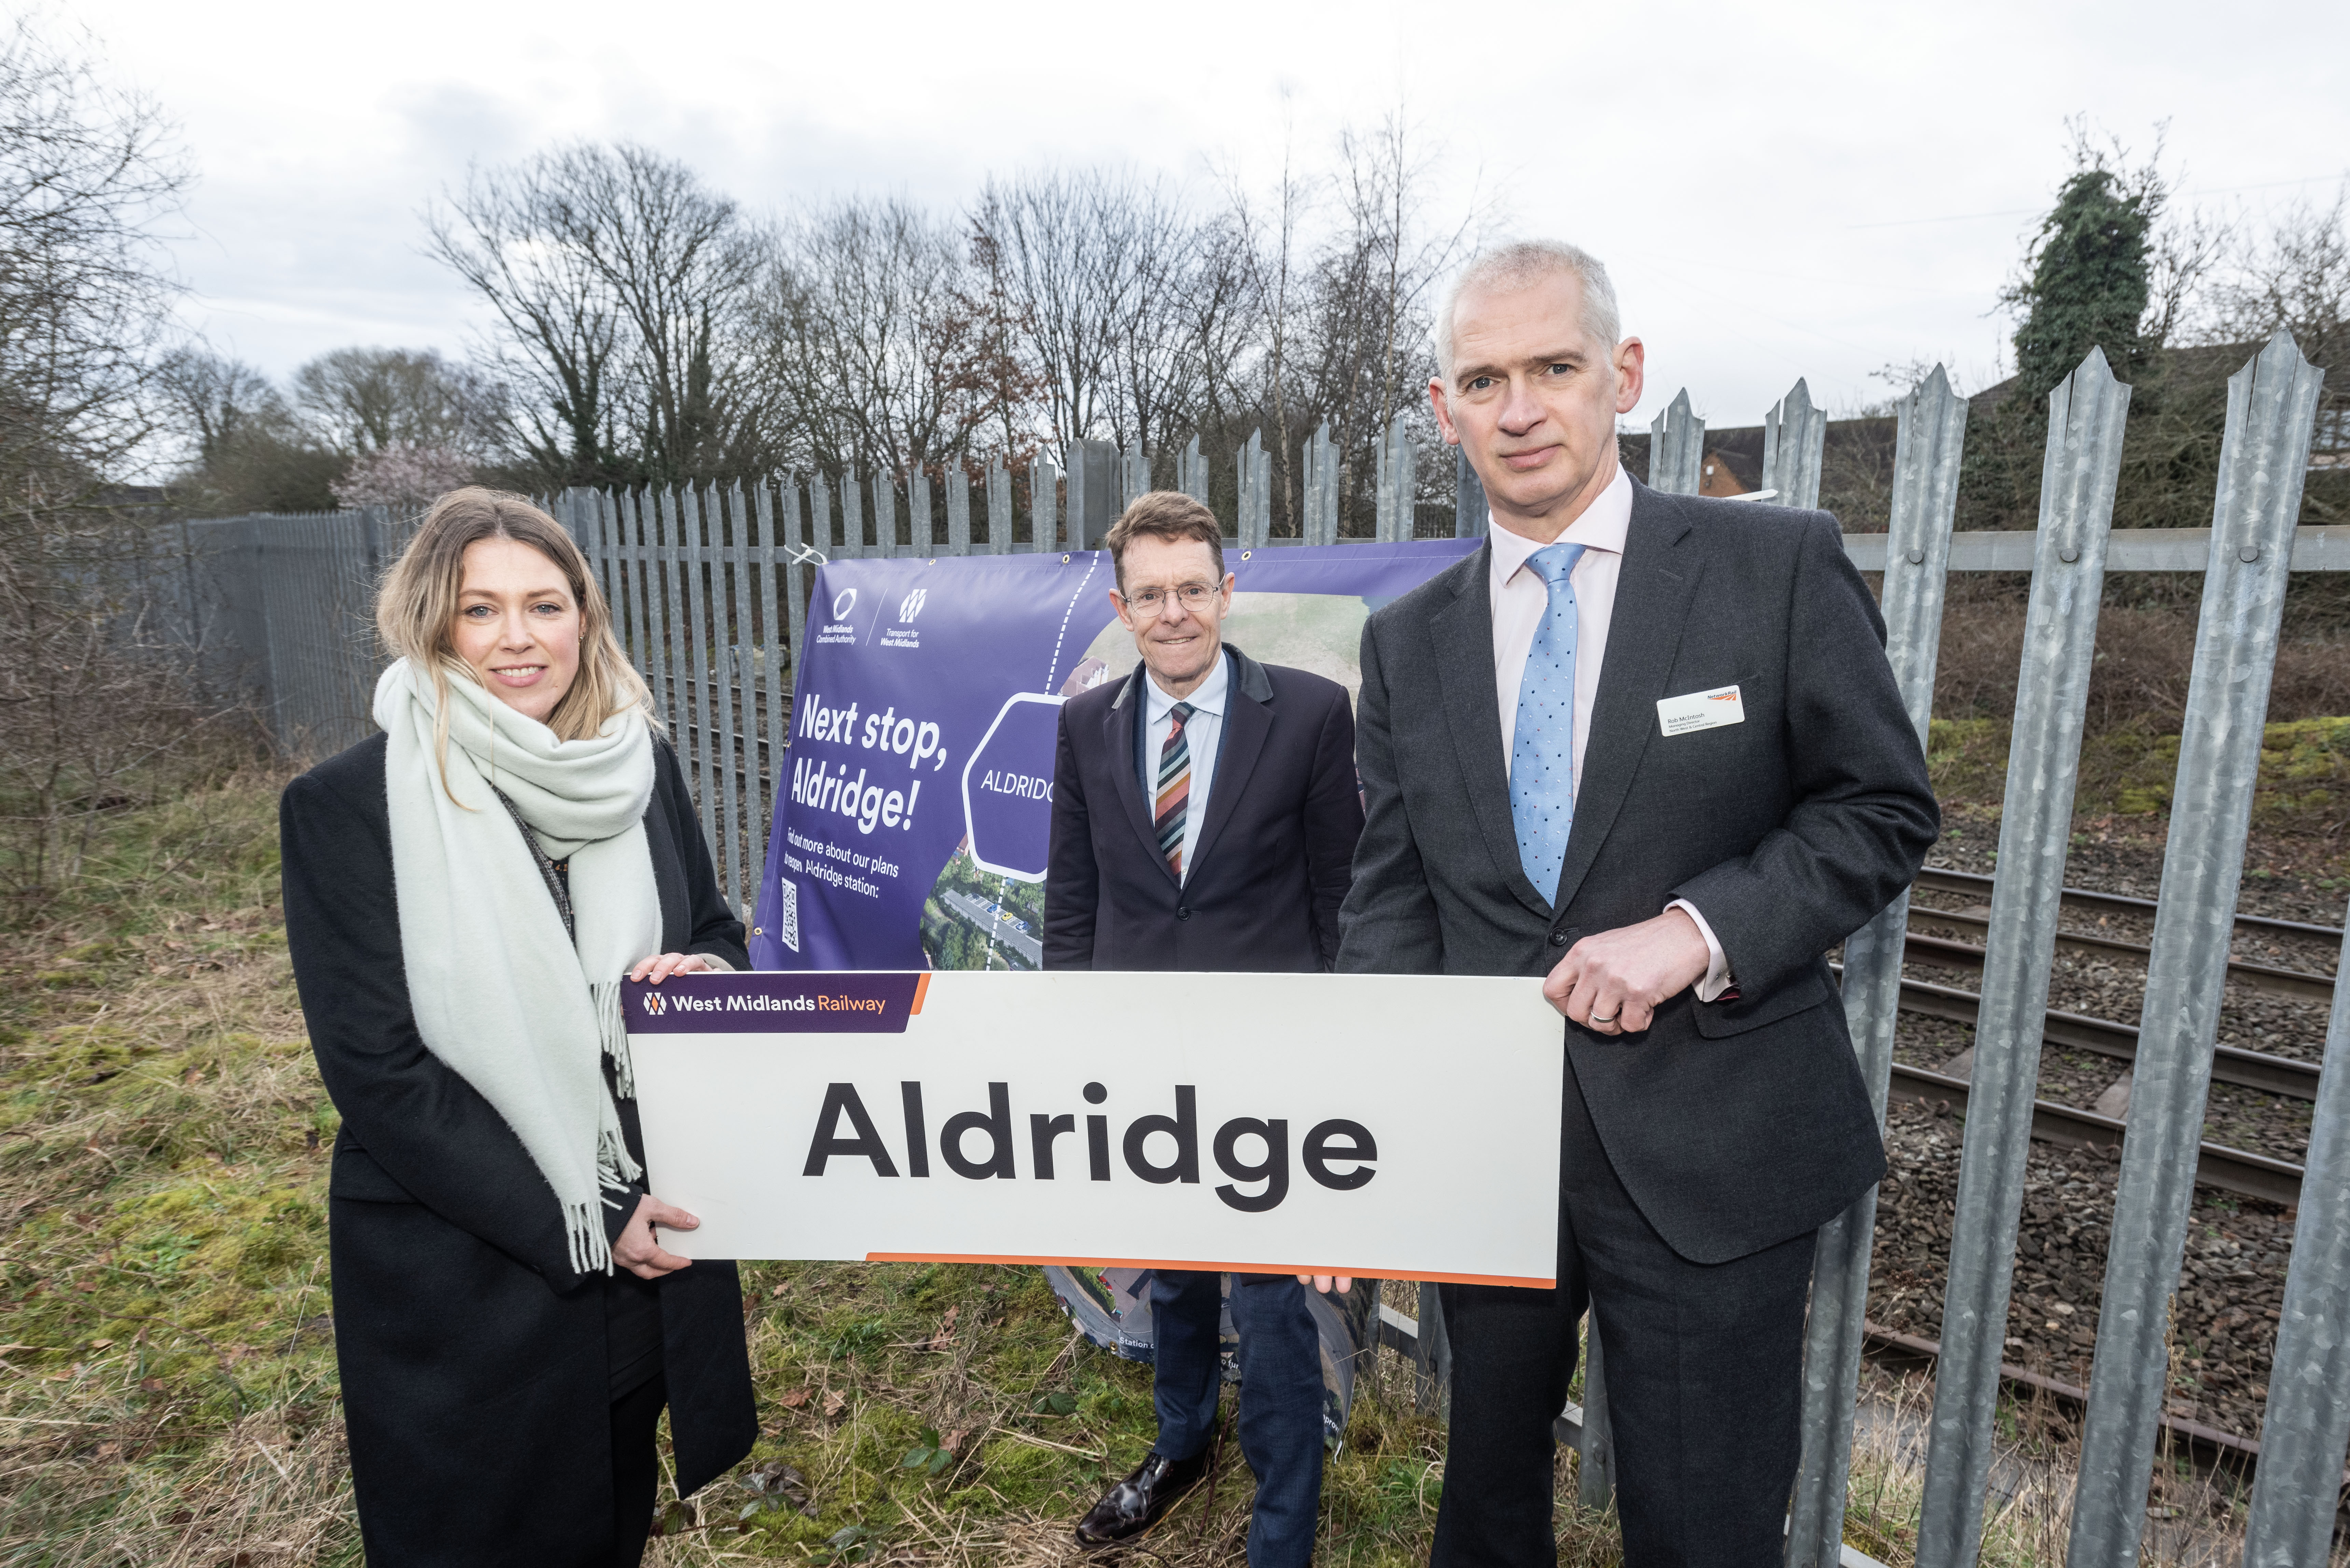 Kate Trevorrow, TfWM rail delivery director, Andy Street Mayor of the West Midlands and Rob McIntosh, managing director for Network Rail's North West and Central Region holding an Aldridge Station sign with the rail line behind a fence in the background